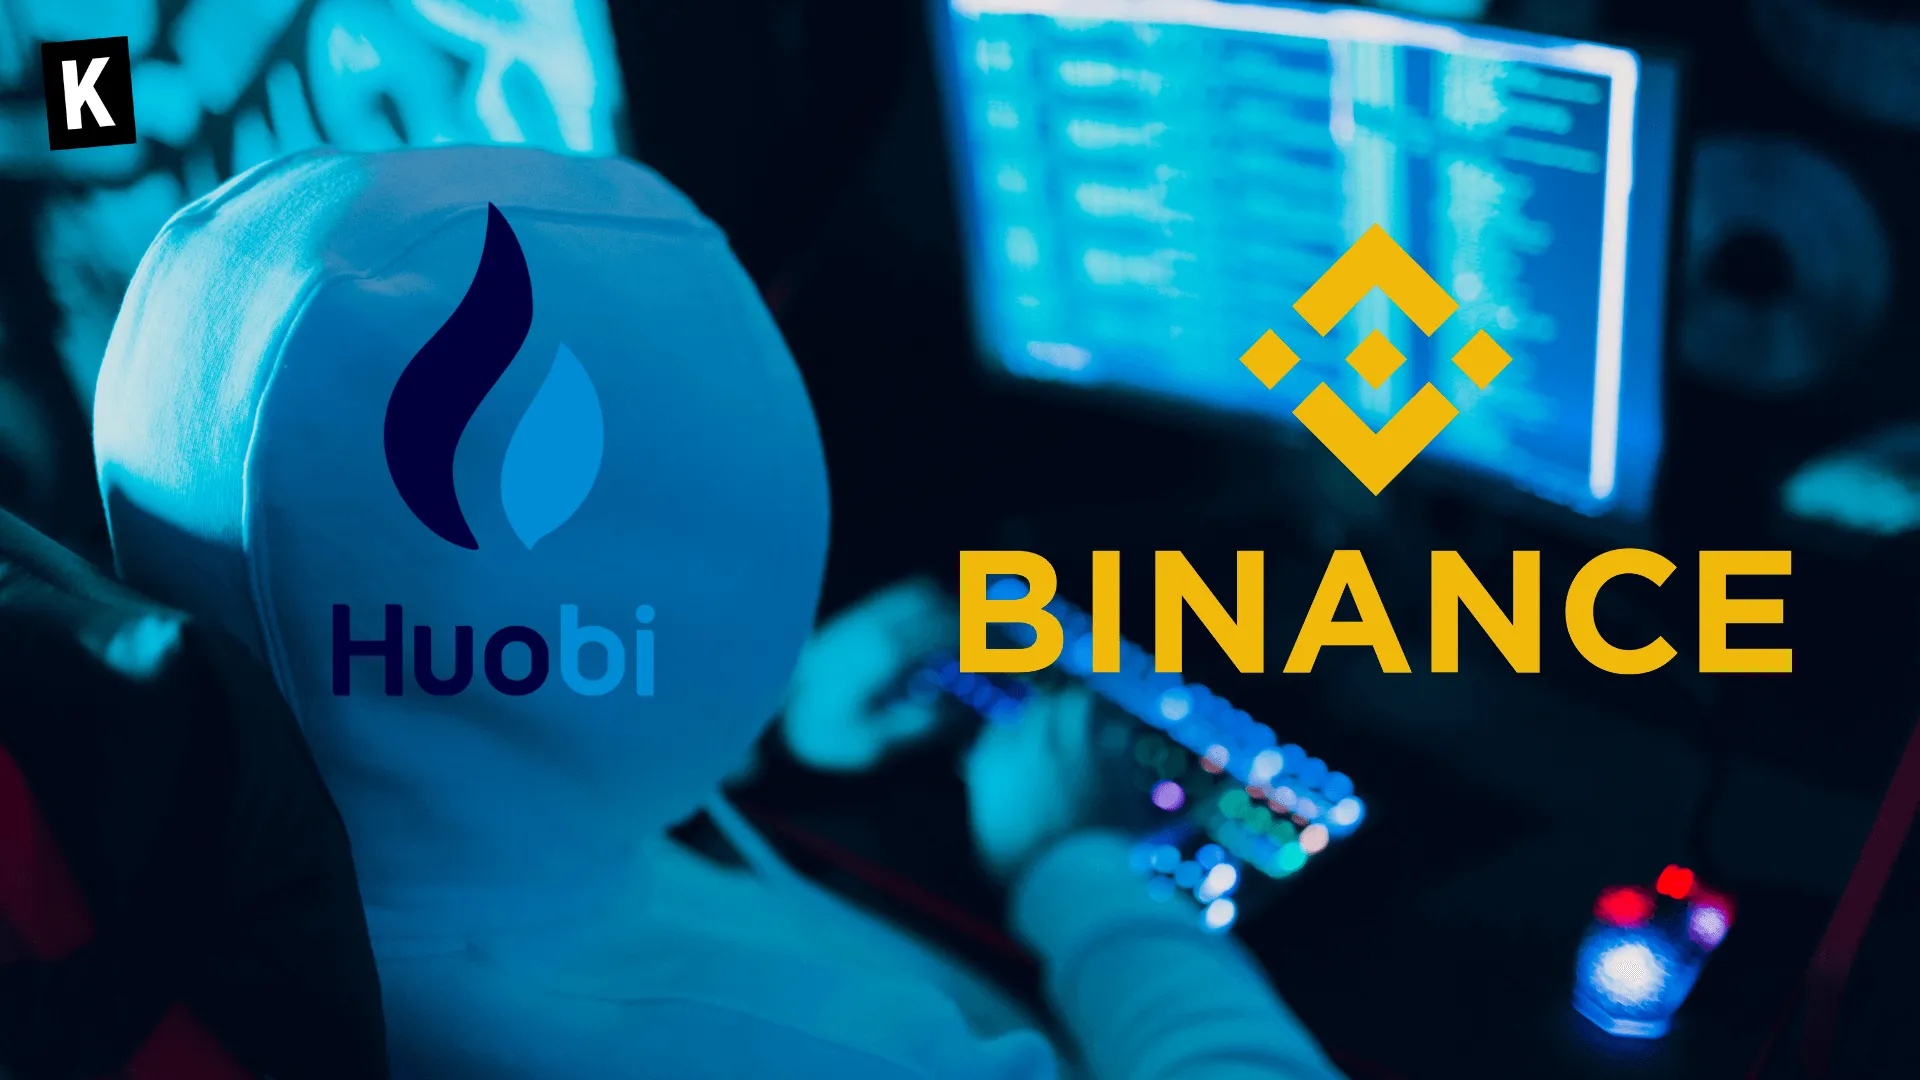 Huobi and Binance logos on a picture of someone coding, to represent hacking